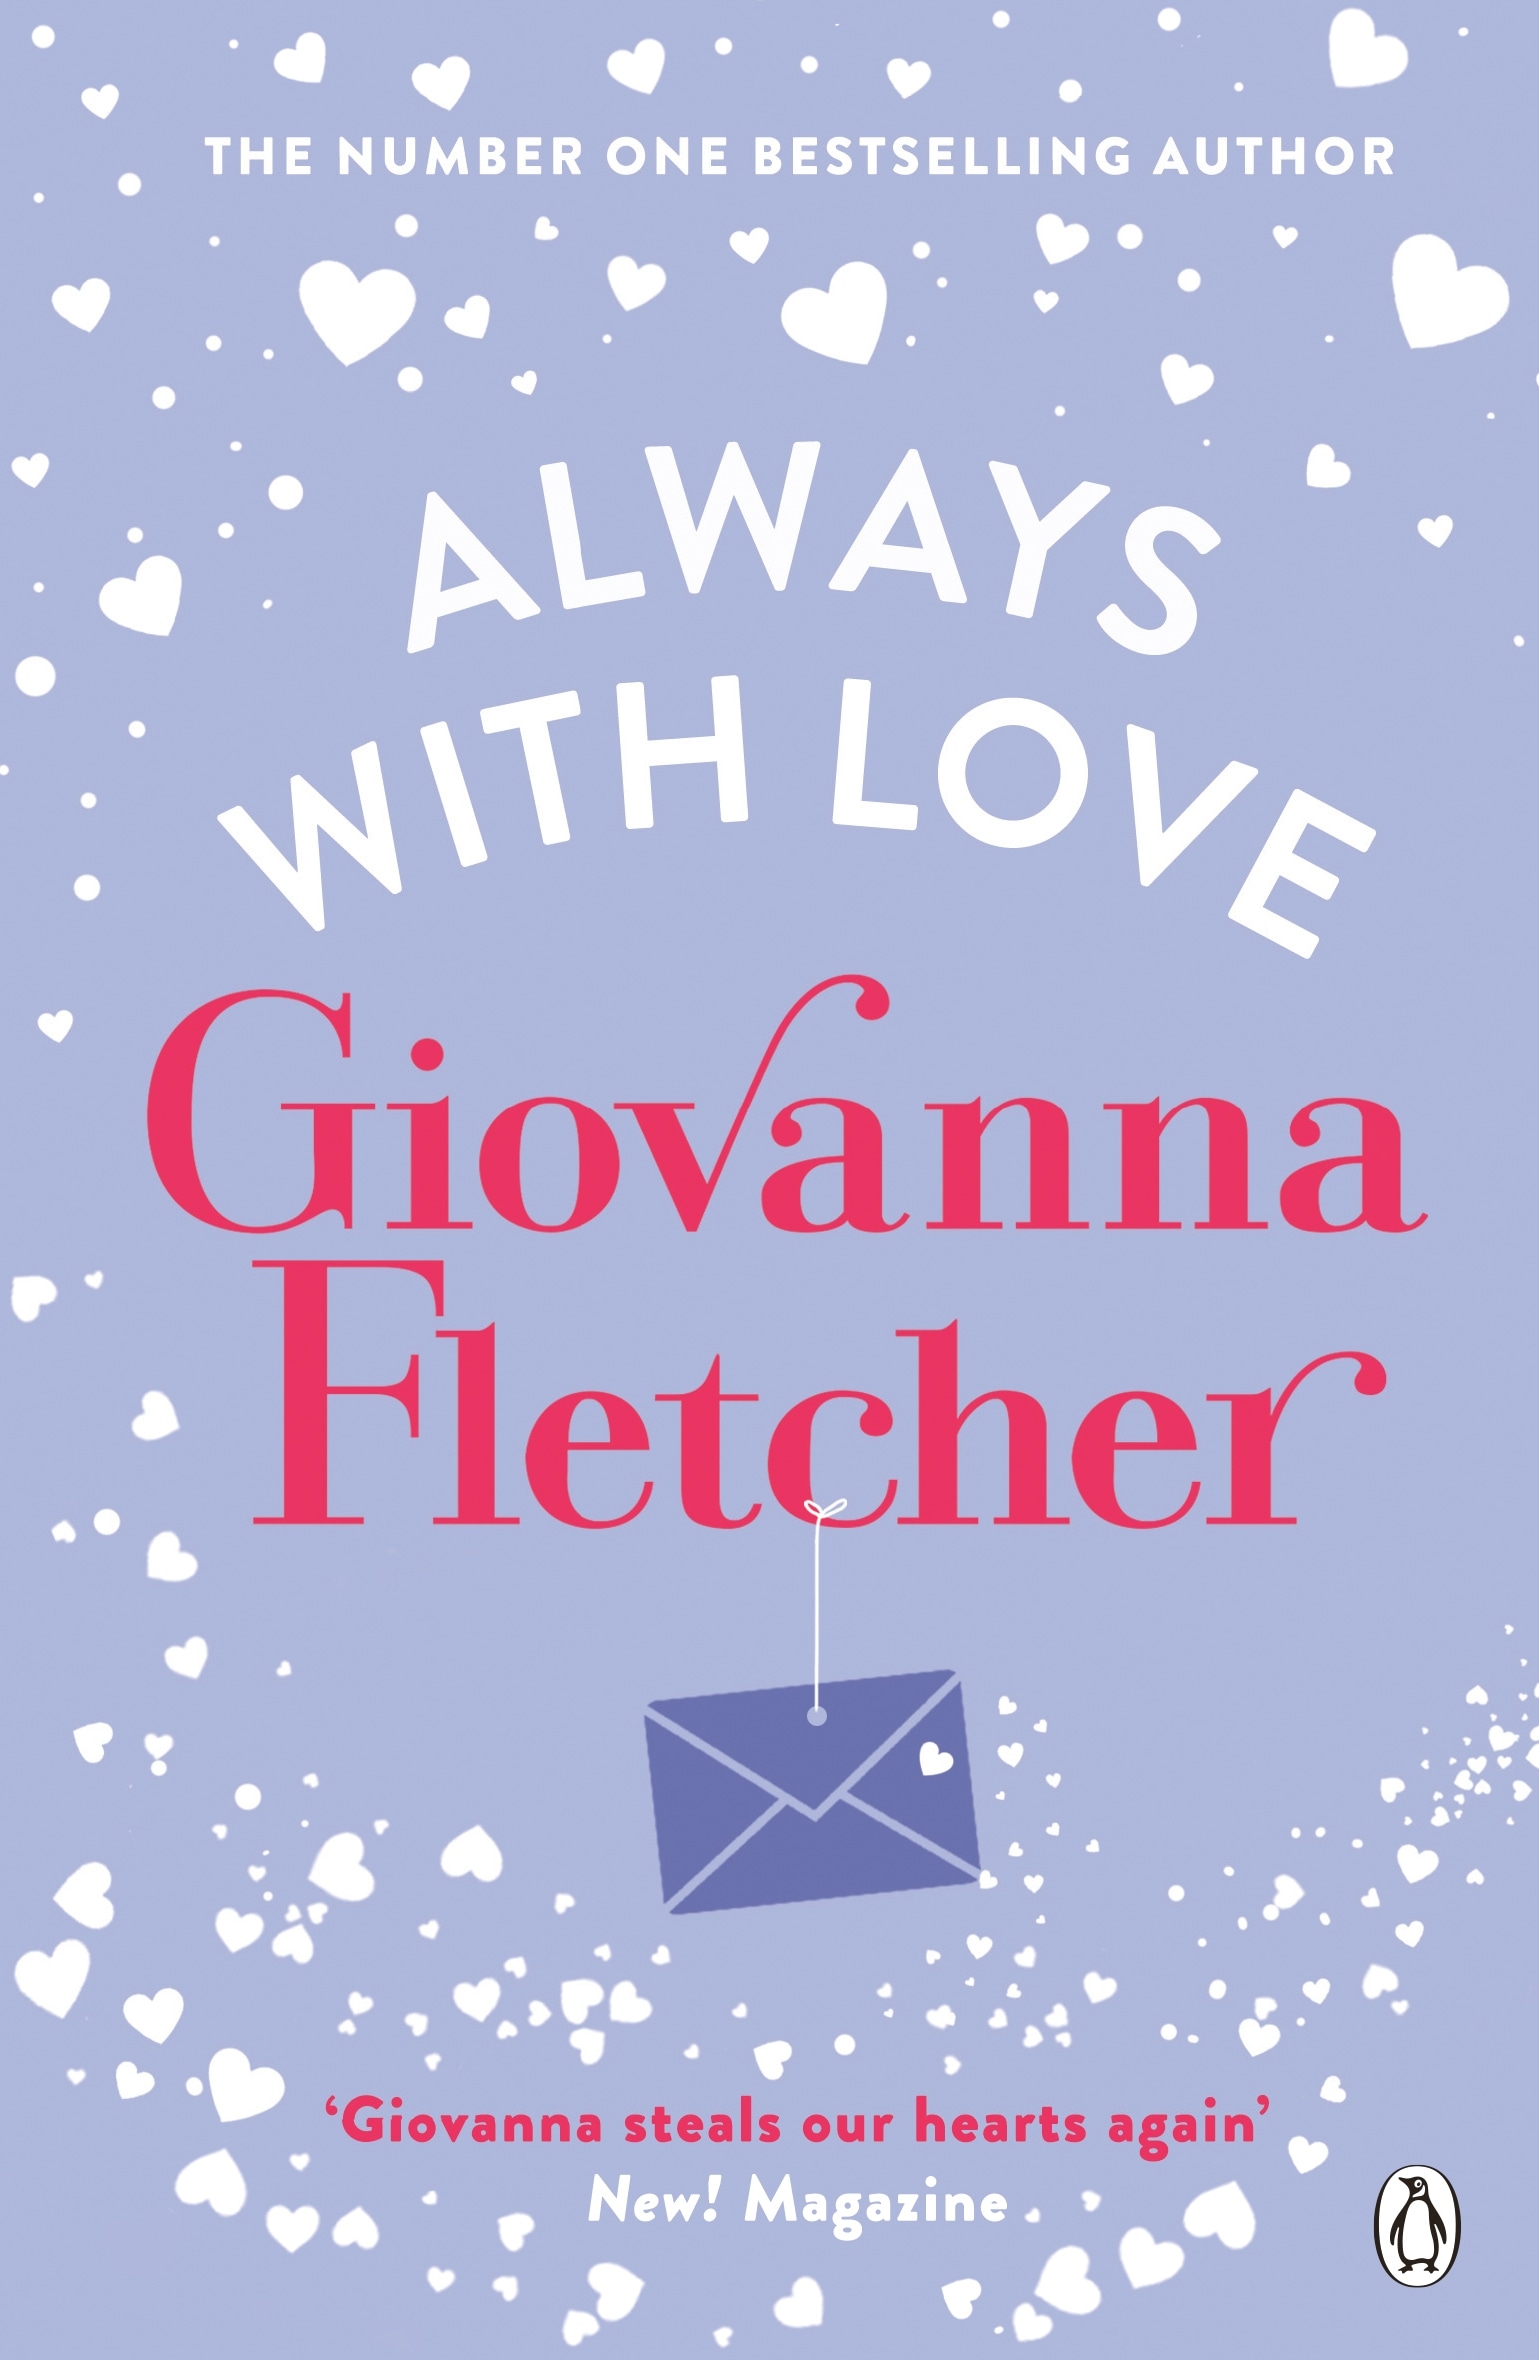 Book “Always With Love” by Giovanna Fletcher — June 2, 2016